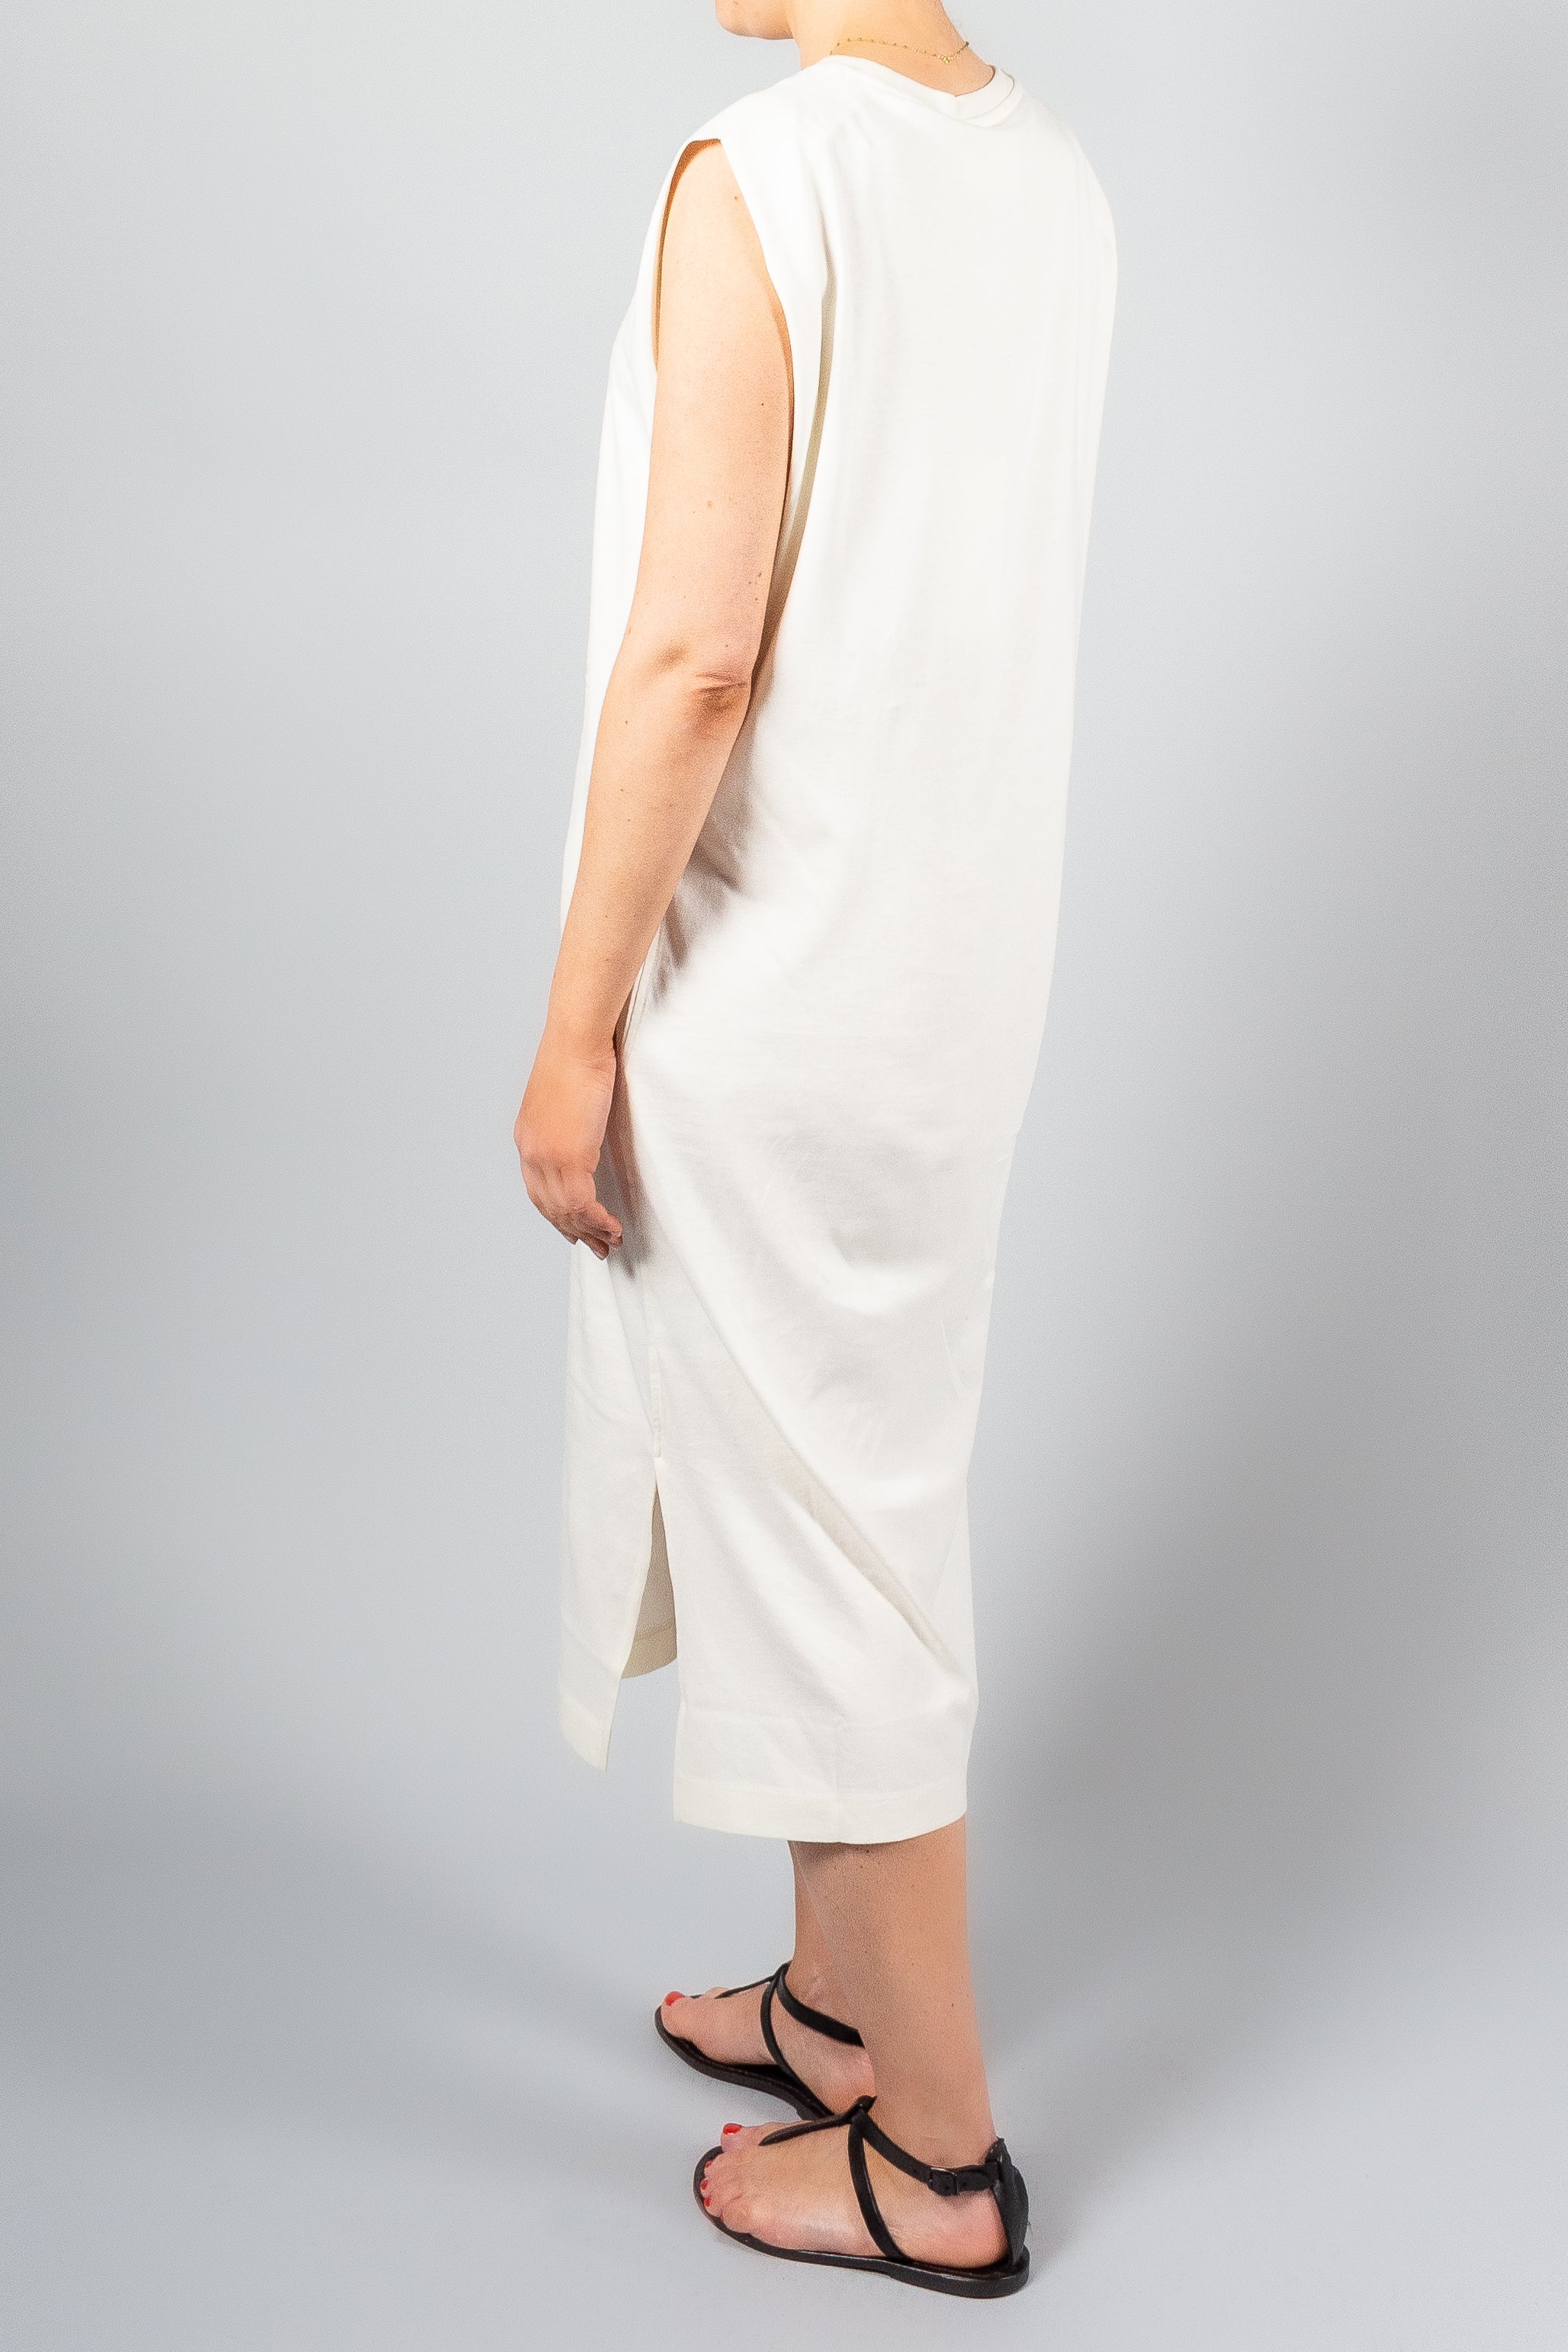 Closed T-Shirt Dress-Dresses and Jumpsuits-Misch-Boutique-Vancouver-Canada-misch.ca